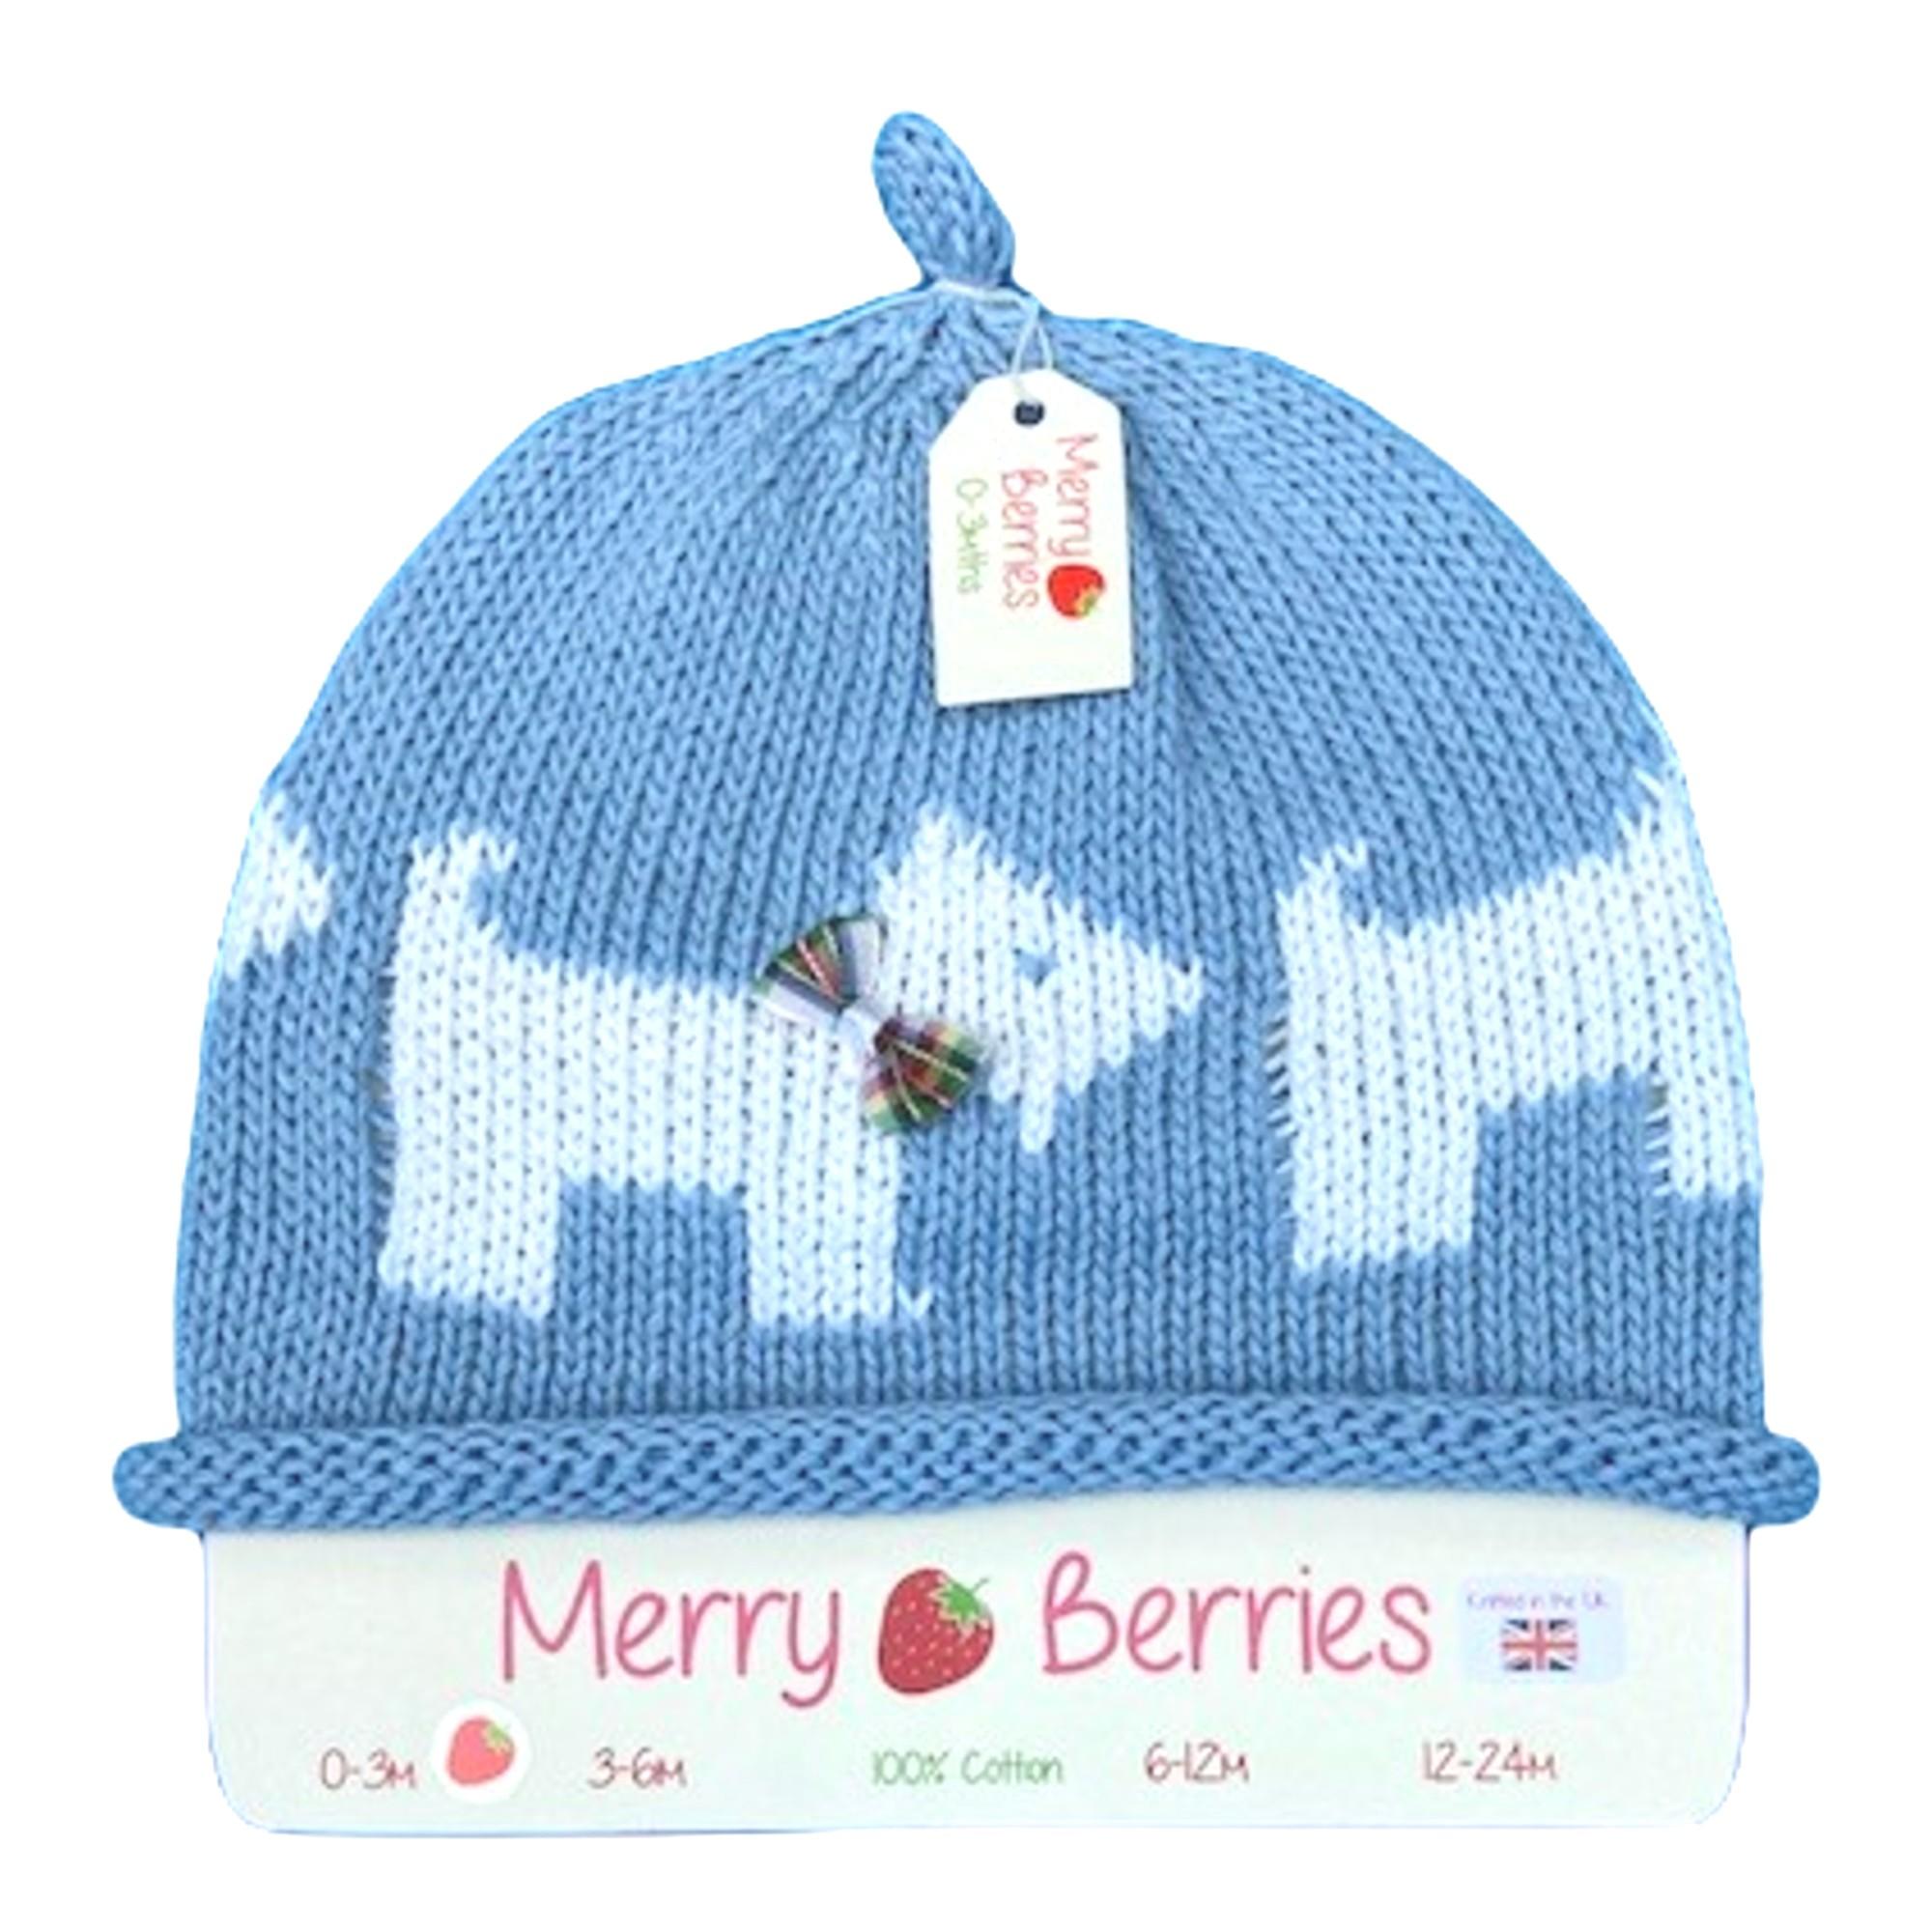 Merry Berries- Sky white scottie Knitted Baby Hat- 0-24 Months- Cotton